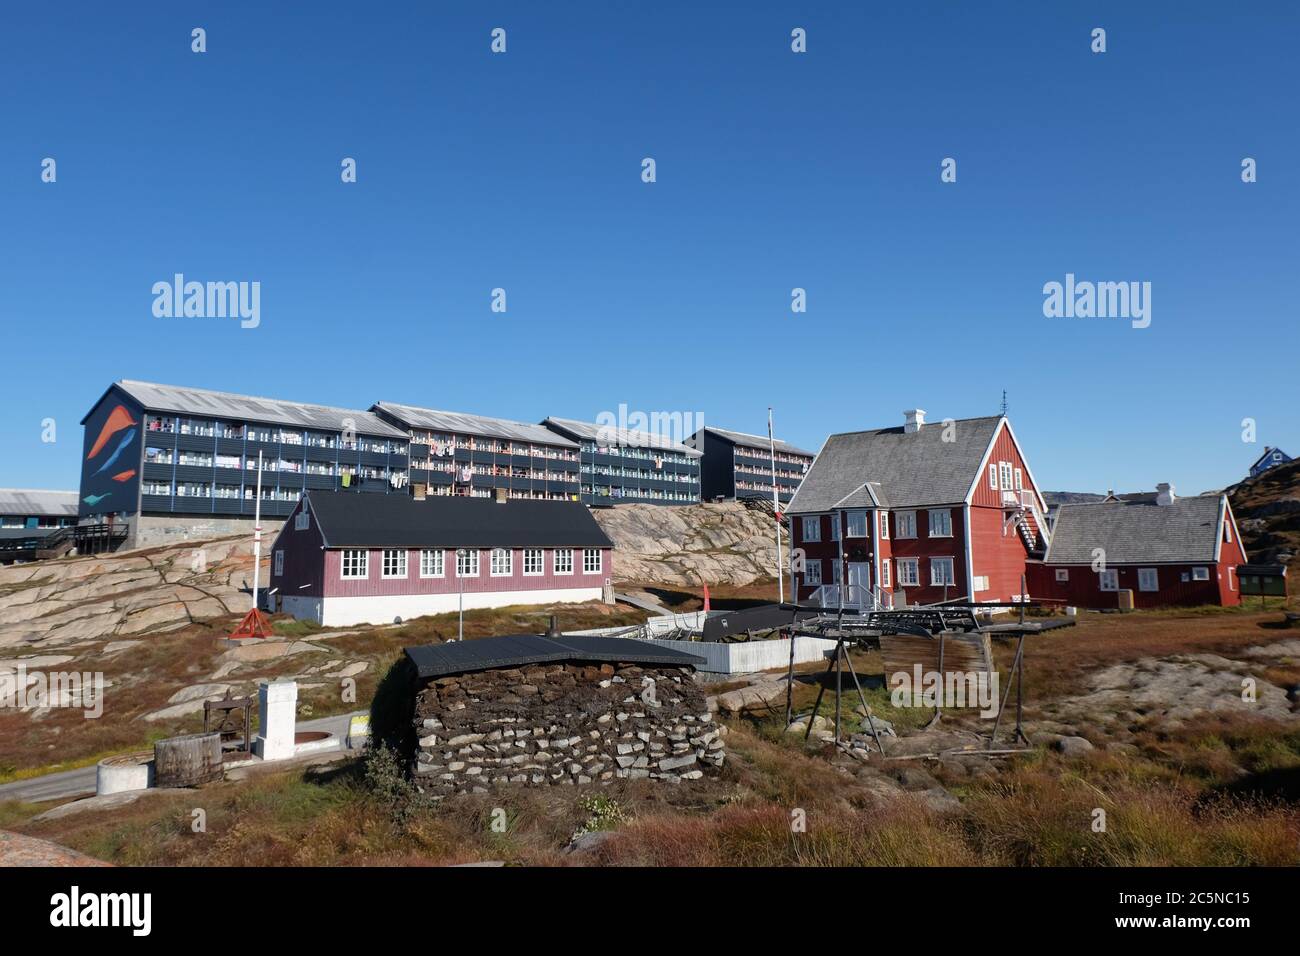 Greenlandic dwellings through the ages from stone and turf, to Knud Rasmussen's 19th century home to modern apartment blocks. Stock Photo